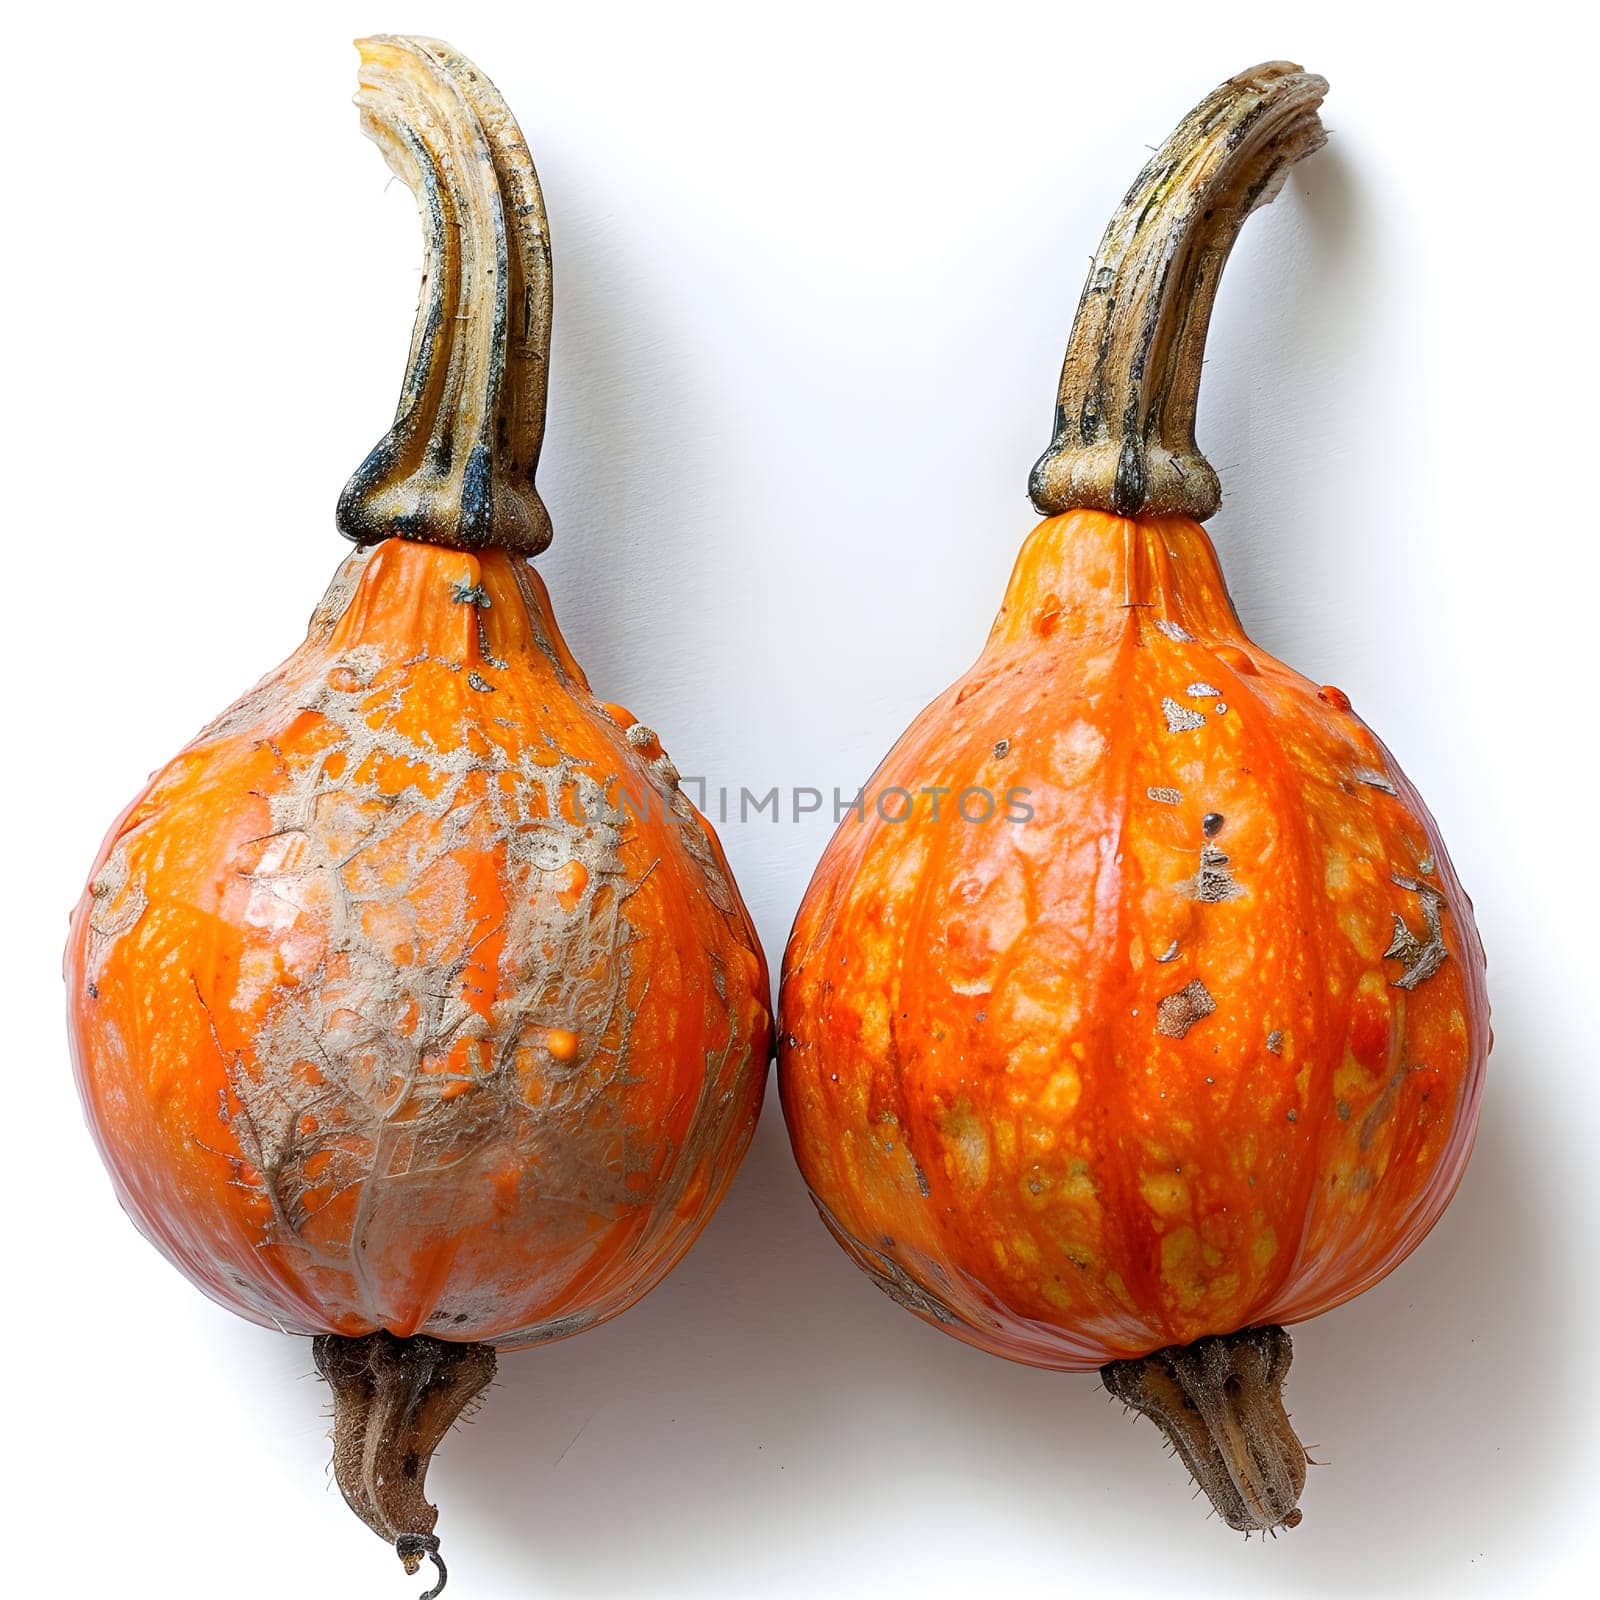 Two orange calabaza pumpkins are displayed next to each other on a white pottery serveware. These winter squash are commonly used as natural foods and also serve as creative arts inspiration